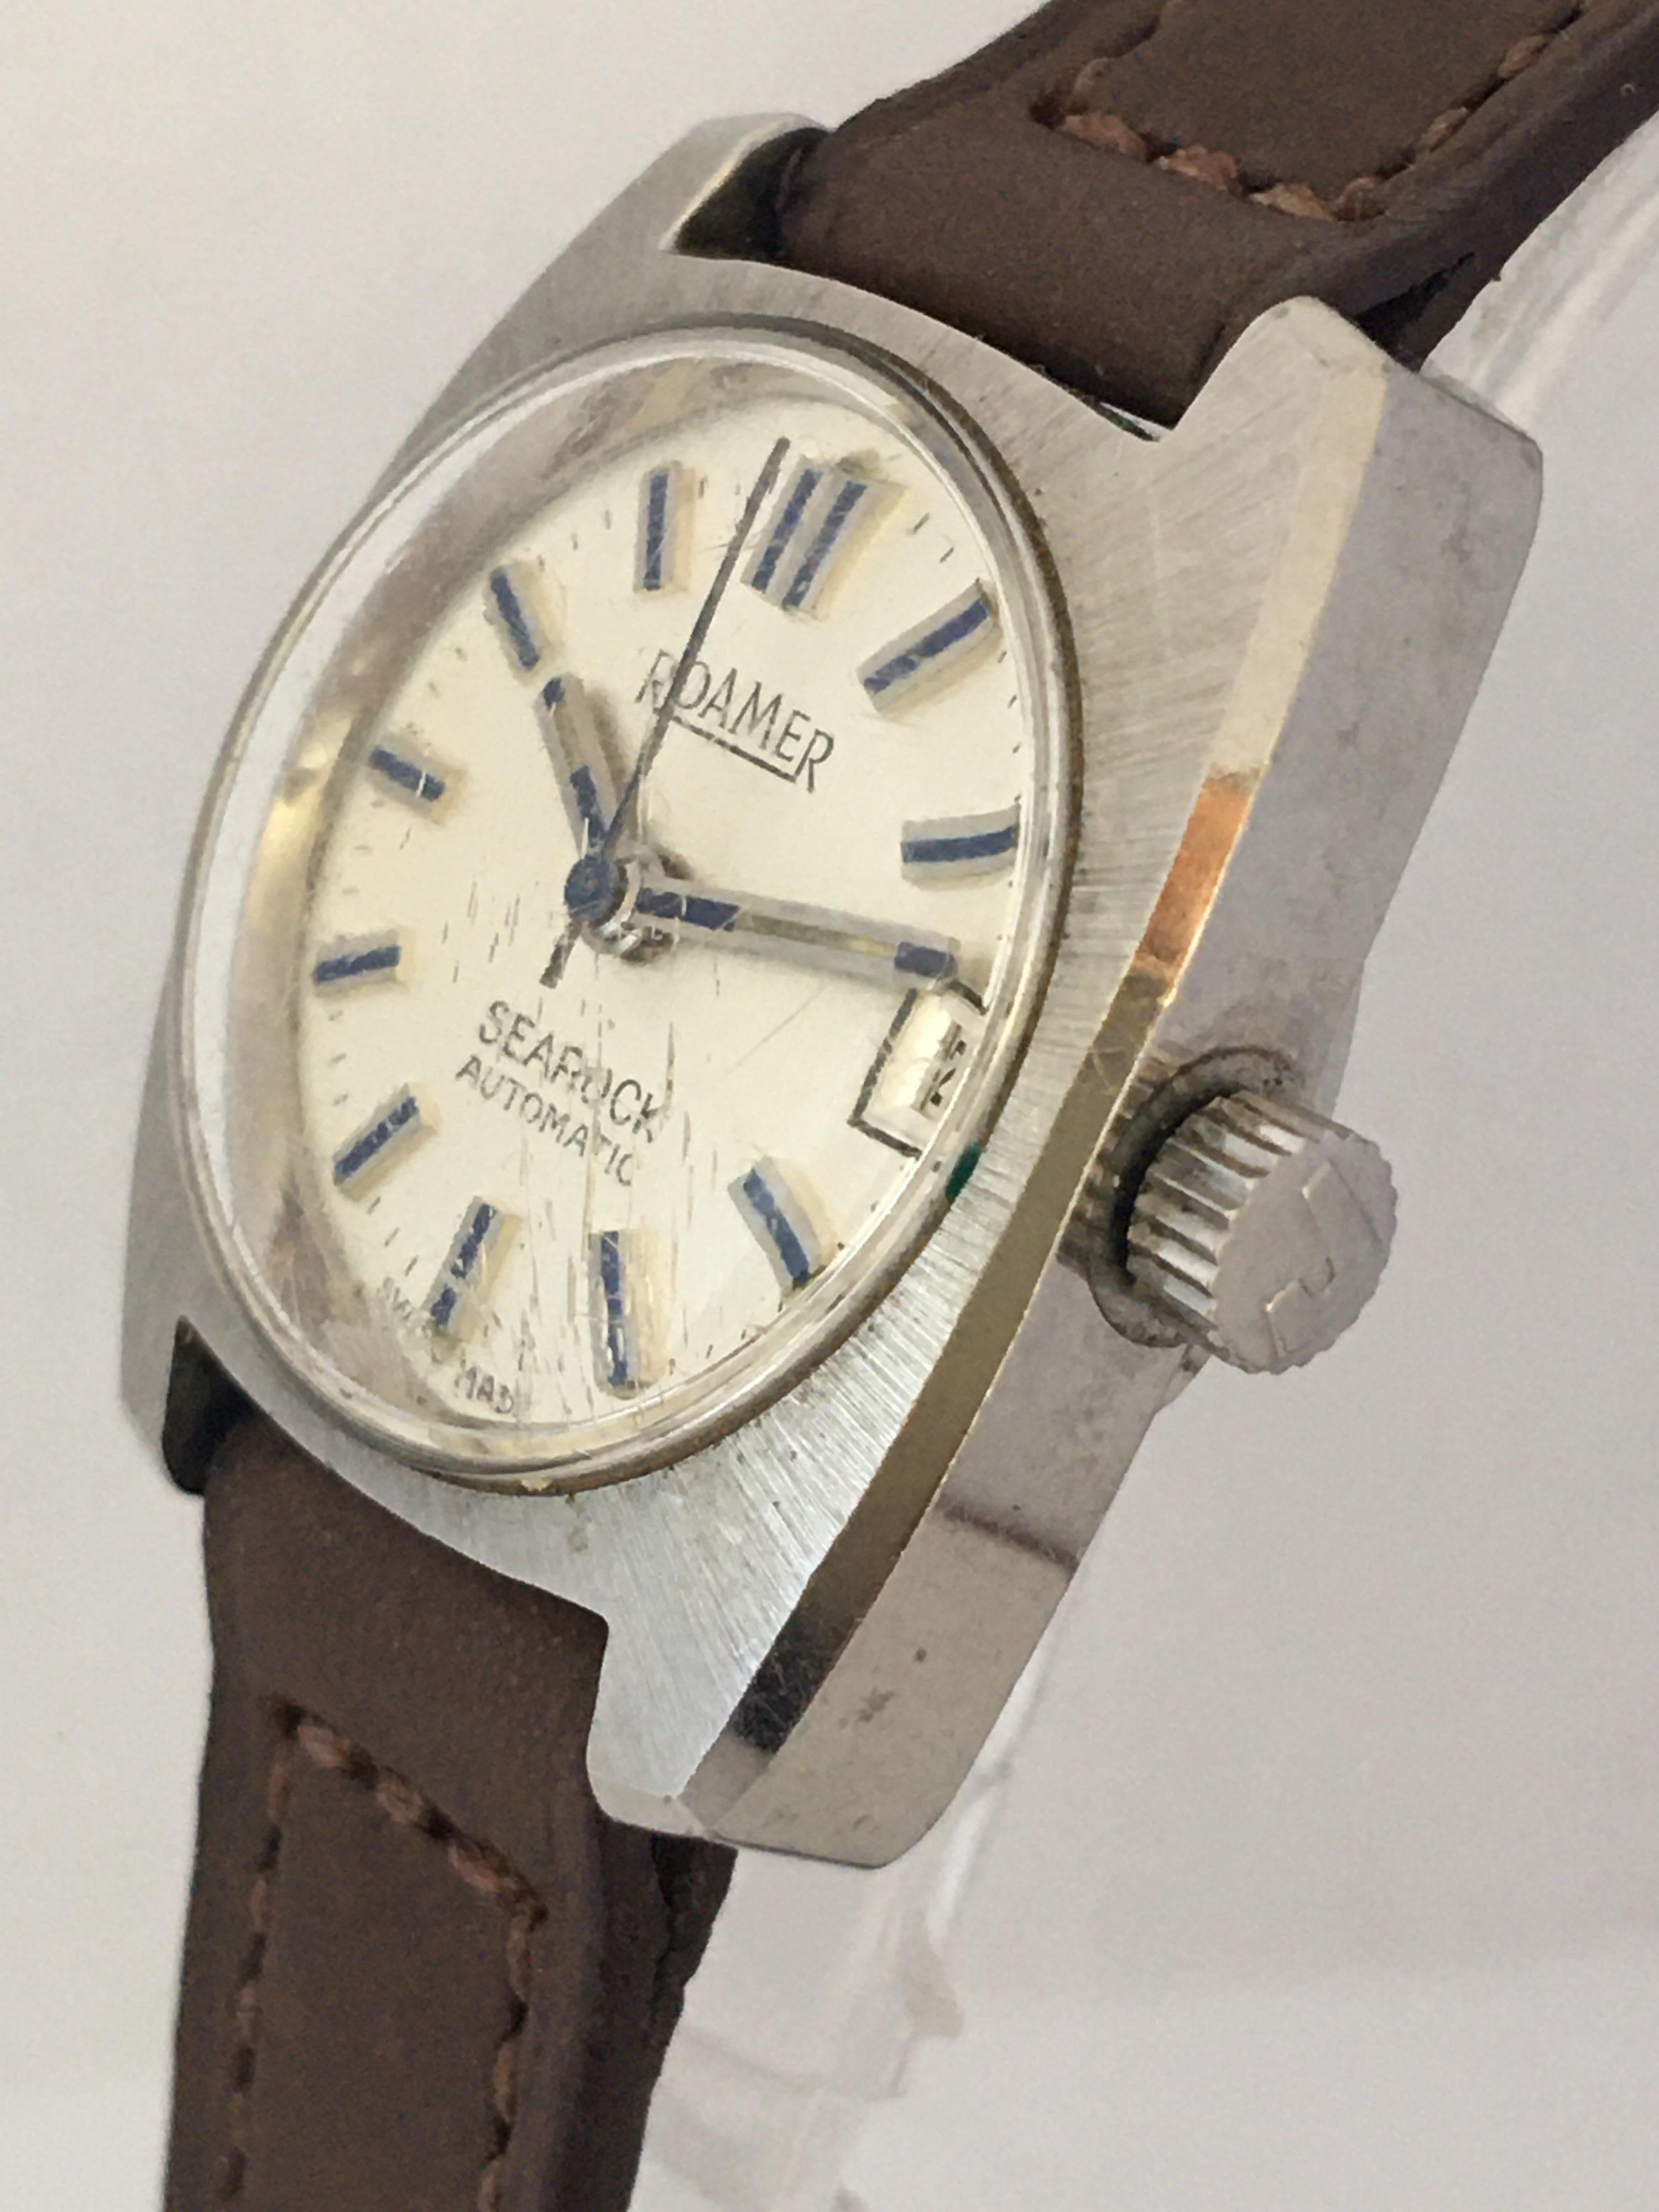 This beautiful pre-owned automatic ( self winding) ladies watch is in good working condition and it is running well. Visible signs of ageing and wear with some scratches on the glass and on the watch case as shown. Please study the images carefully